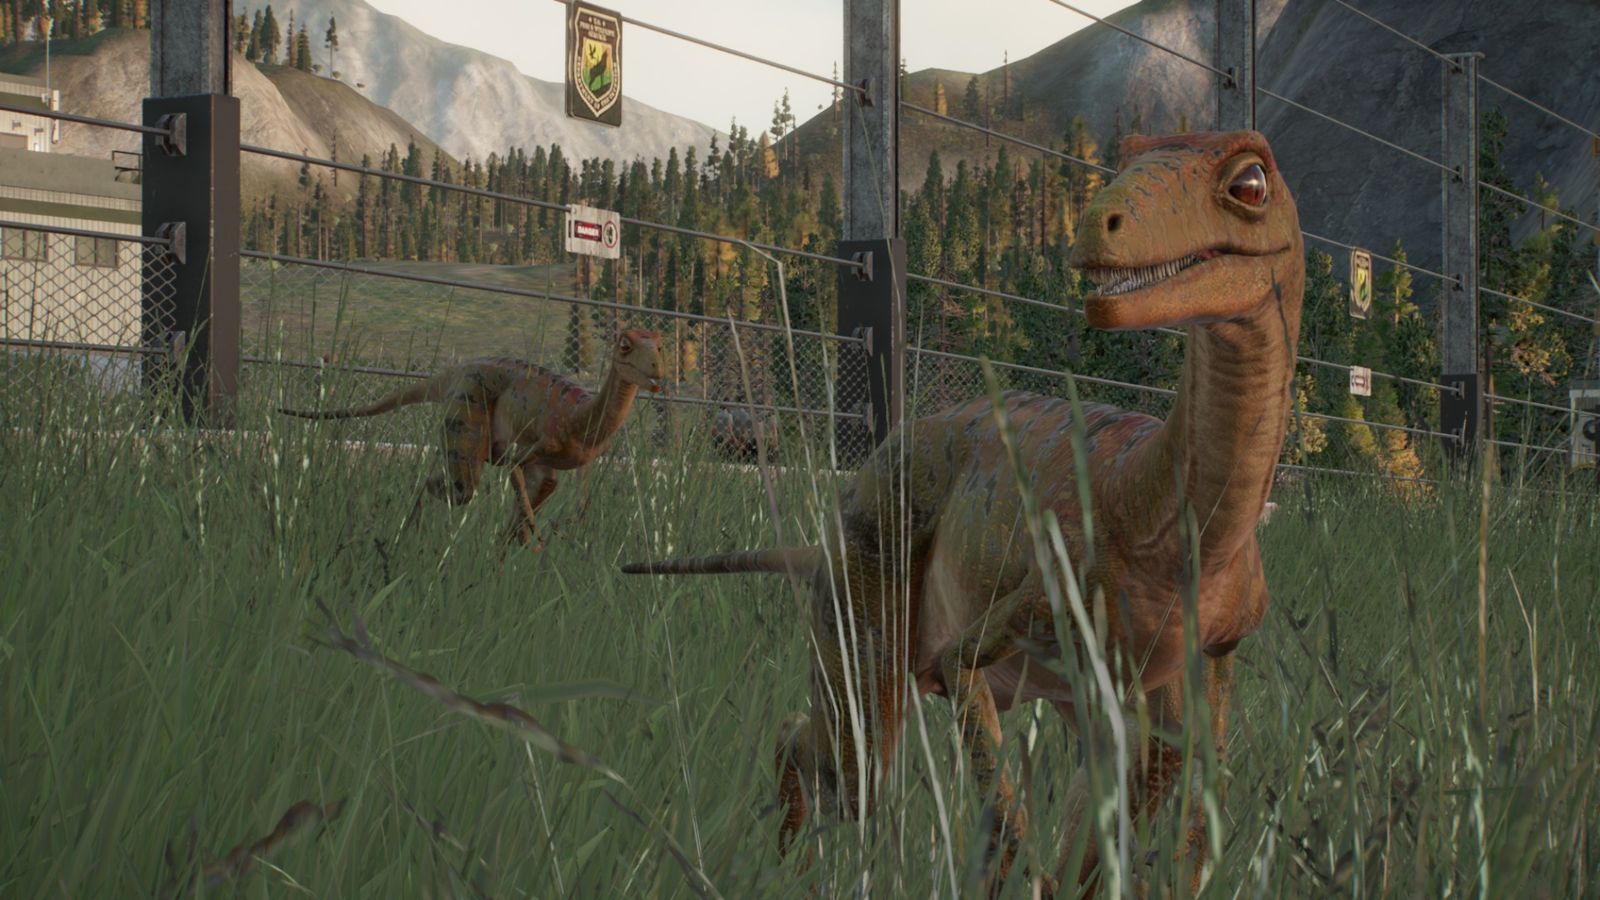 Jurassic World Evolution 2. A Troodon is in the foreground and a Troodon is in the background. Both are near the electric fence perimeter of their enclosure.